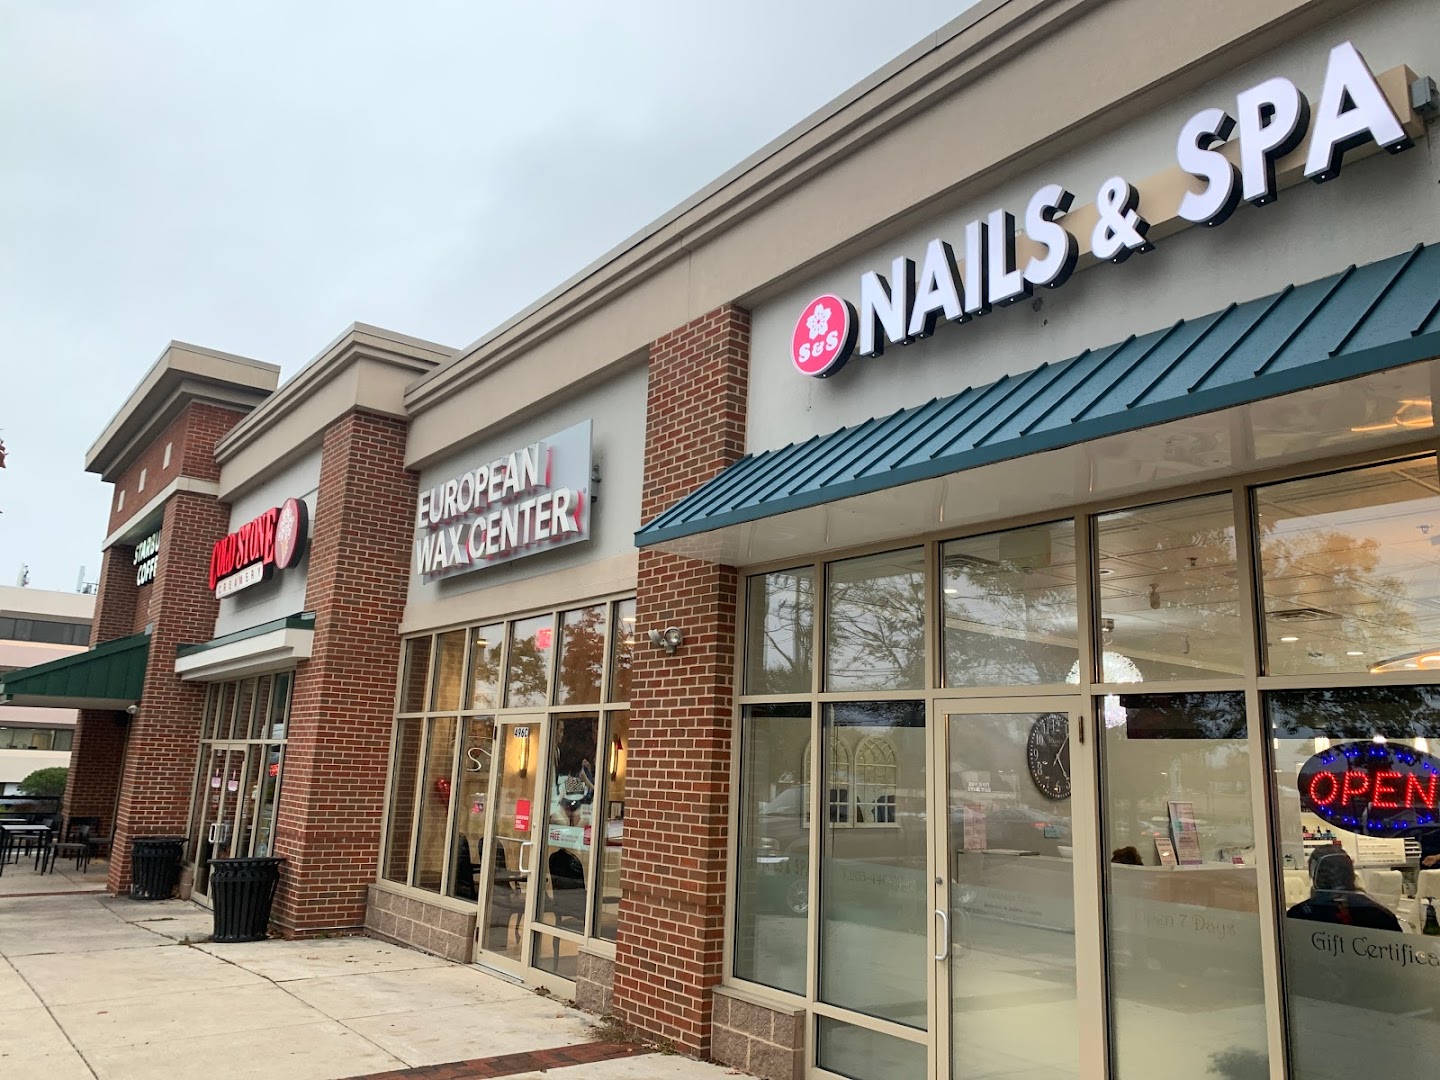 S&S nails & spa